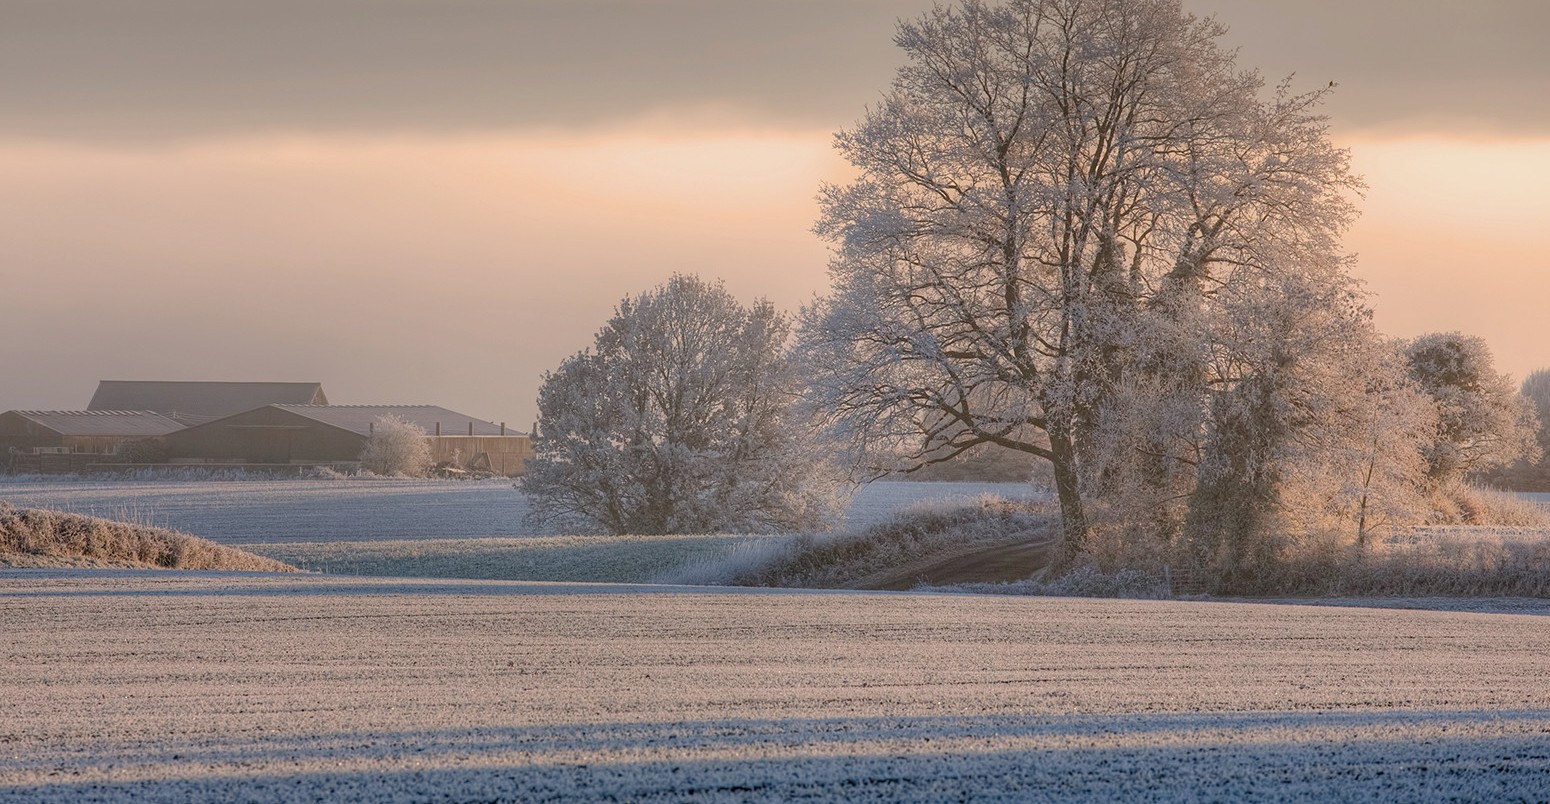 Morning view of Cotswold farmland with hoar frost